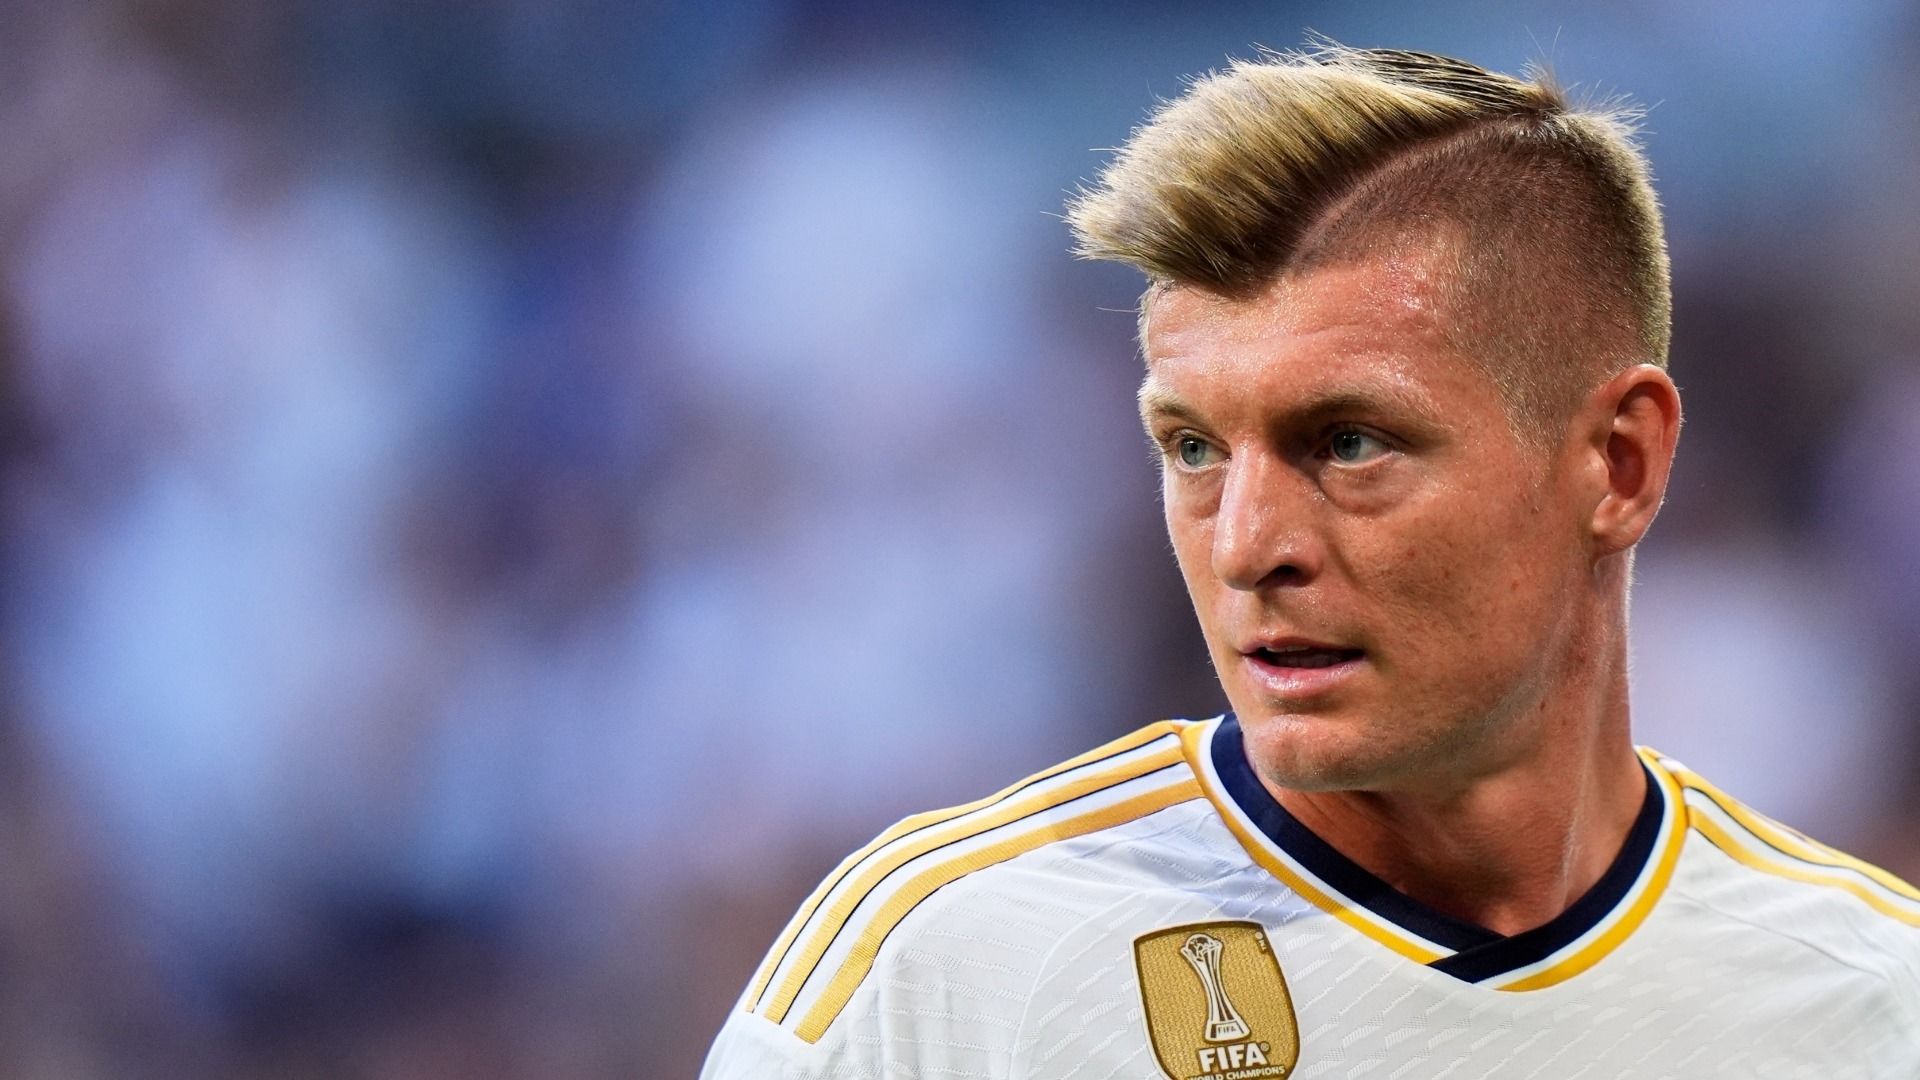 Toni Kroos To Extend Contract With Real Madrid Until 2025